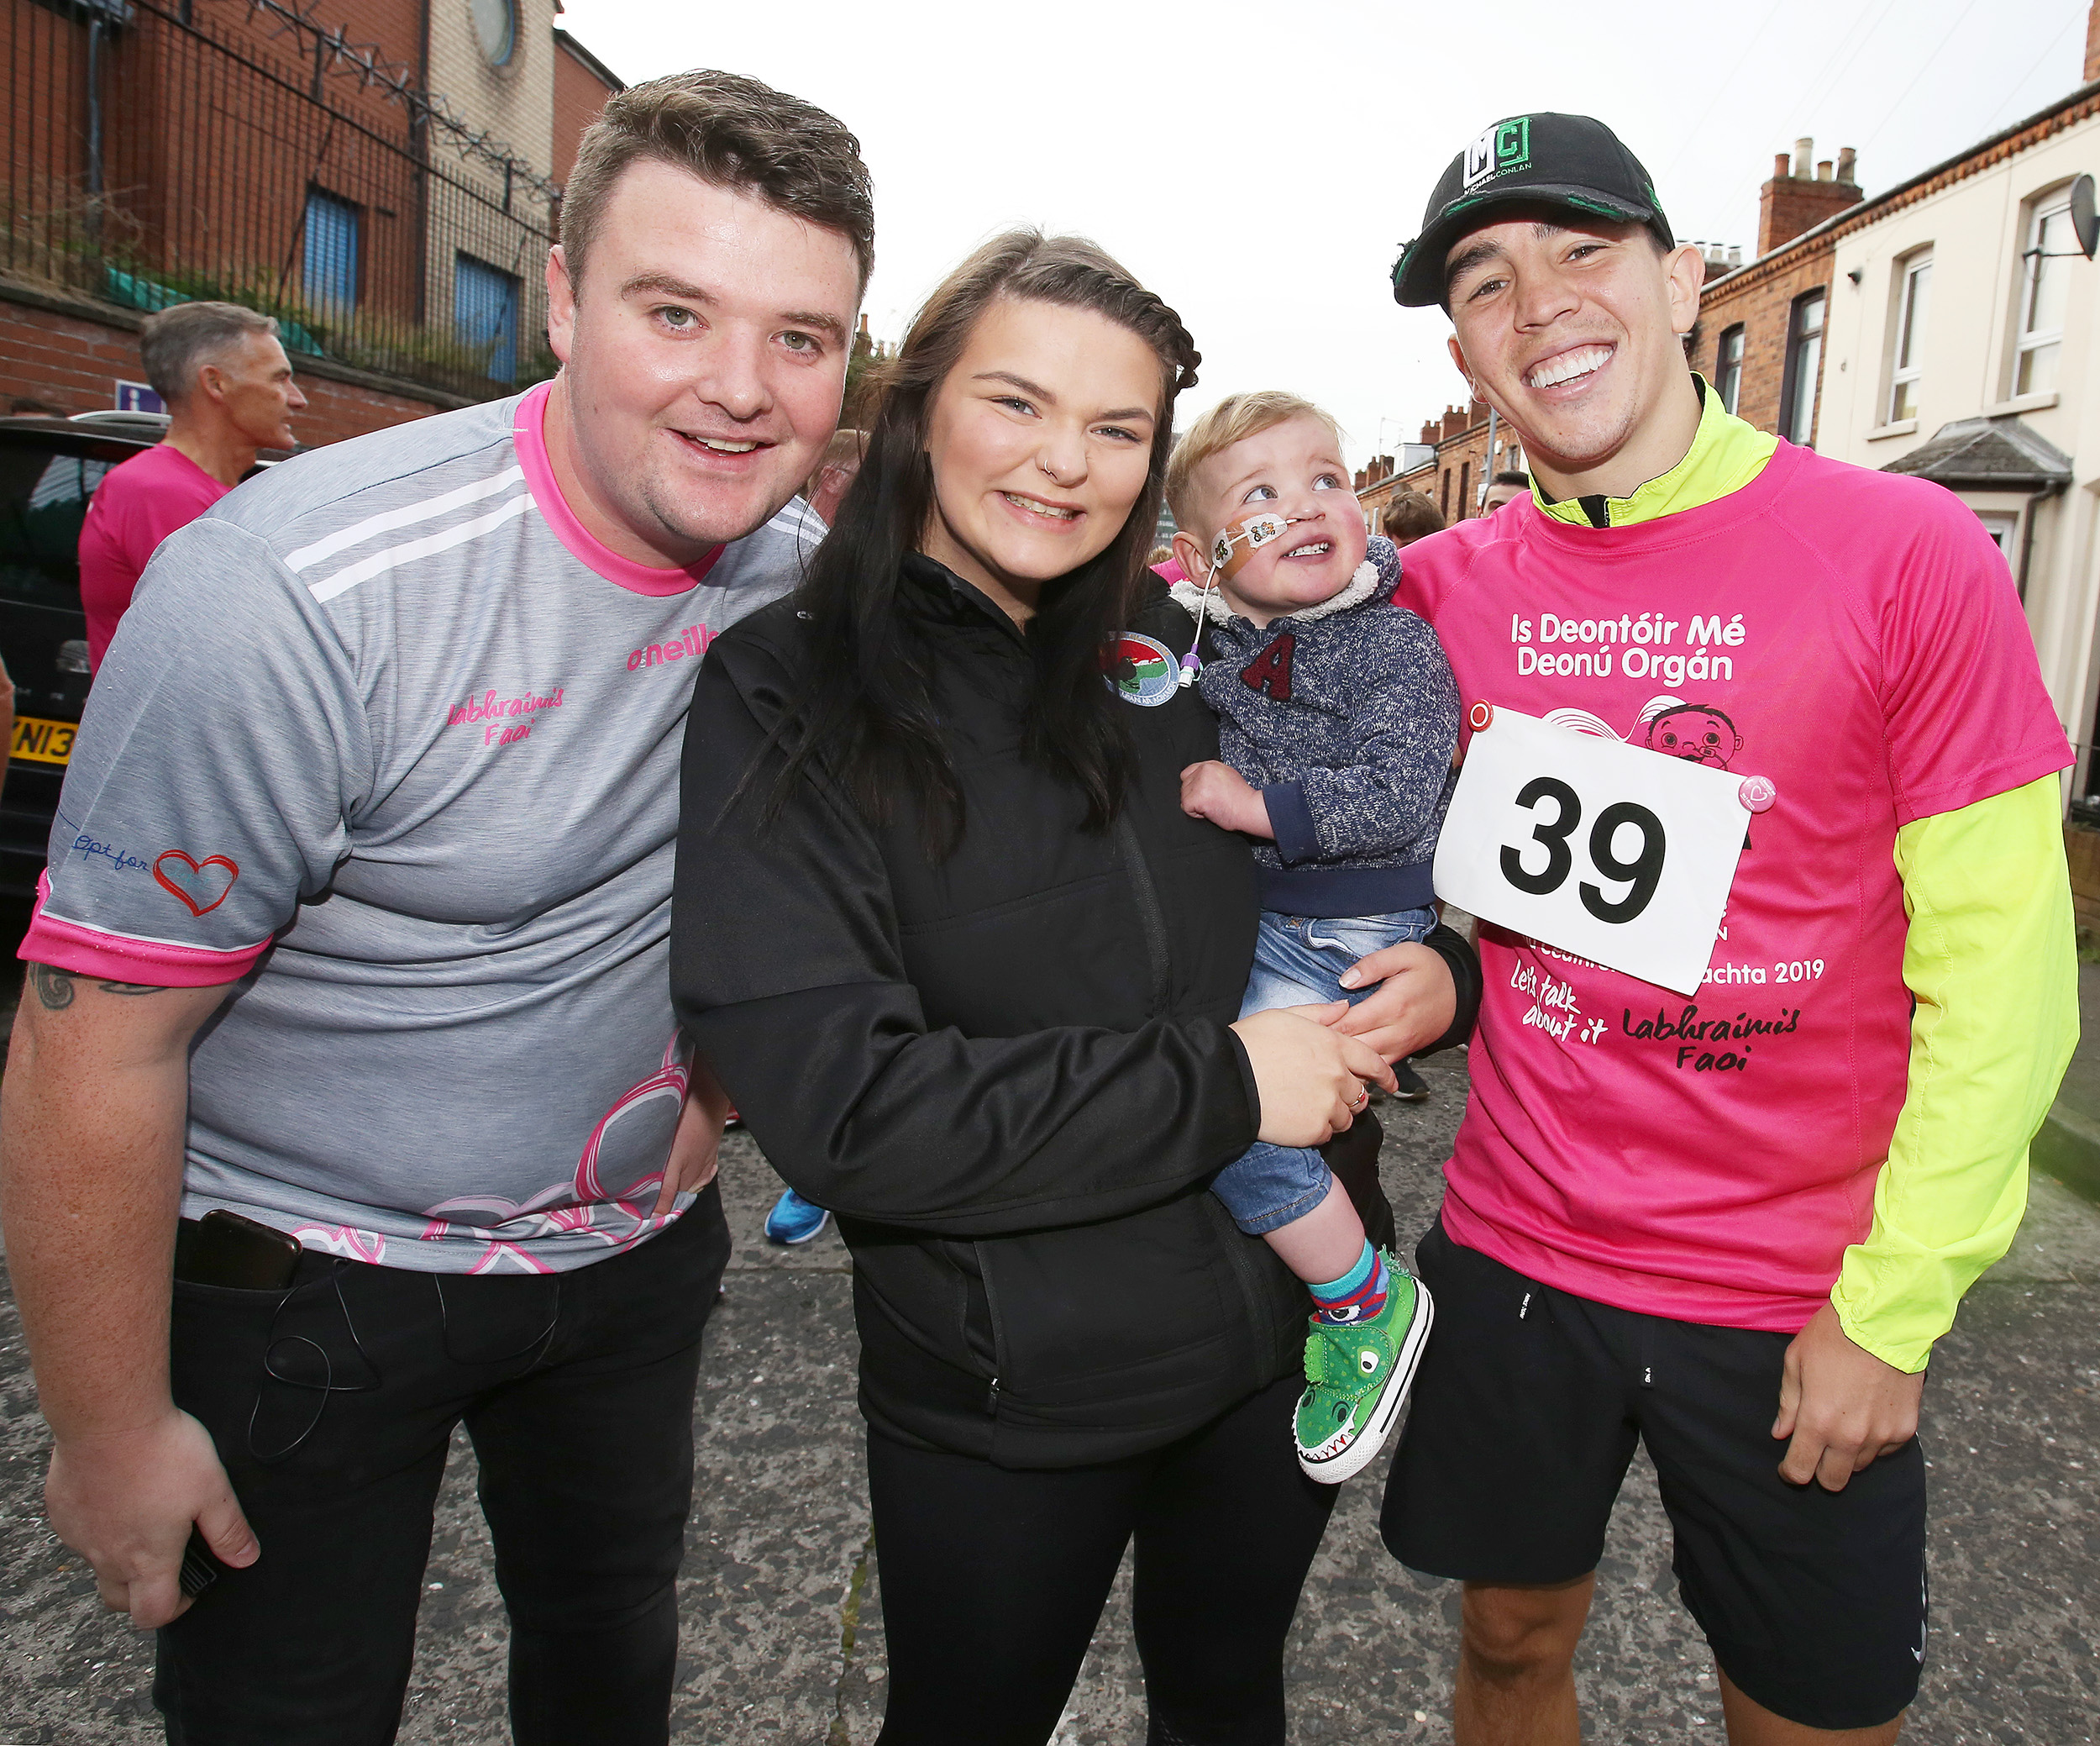 WBA/WBO Inter-Continental Featherweight Champion Michael Conlan laces up with Máirtín and Seph, parents of West Belfast toddler Dáithí Mac Gabhann, to show his support for the Gaeltacht Quarter 10K as part of Organ Donation Week